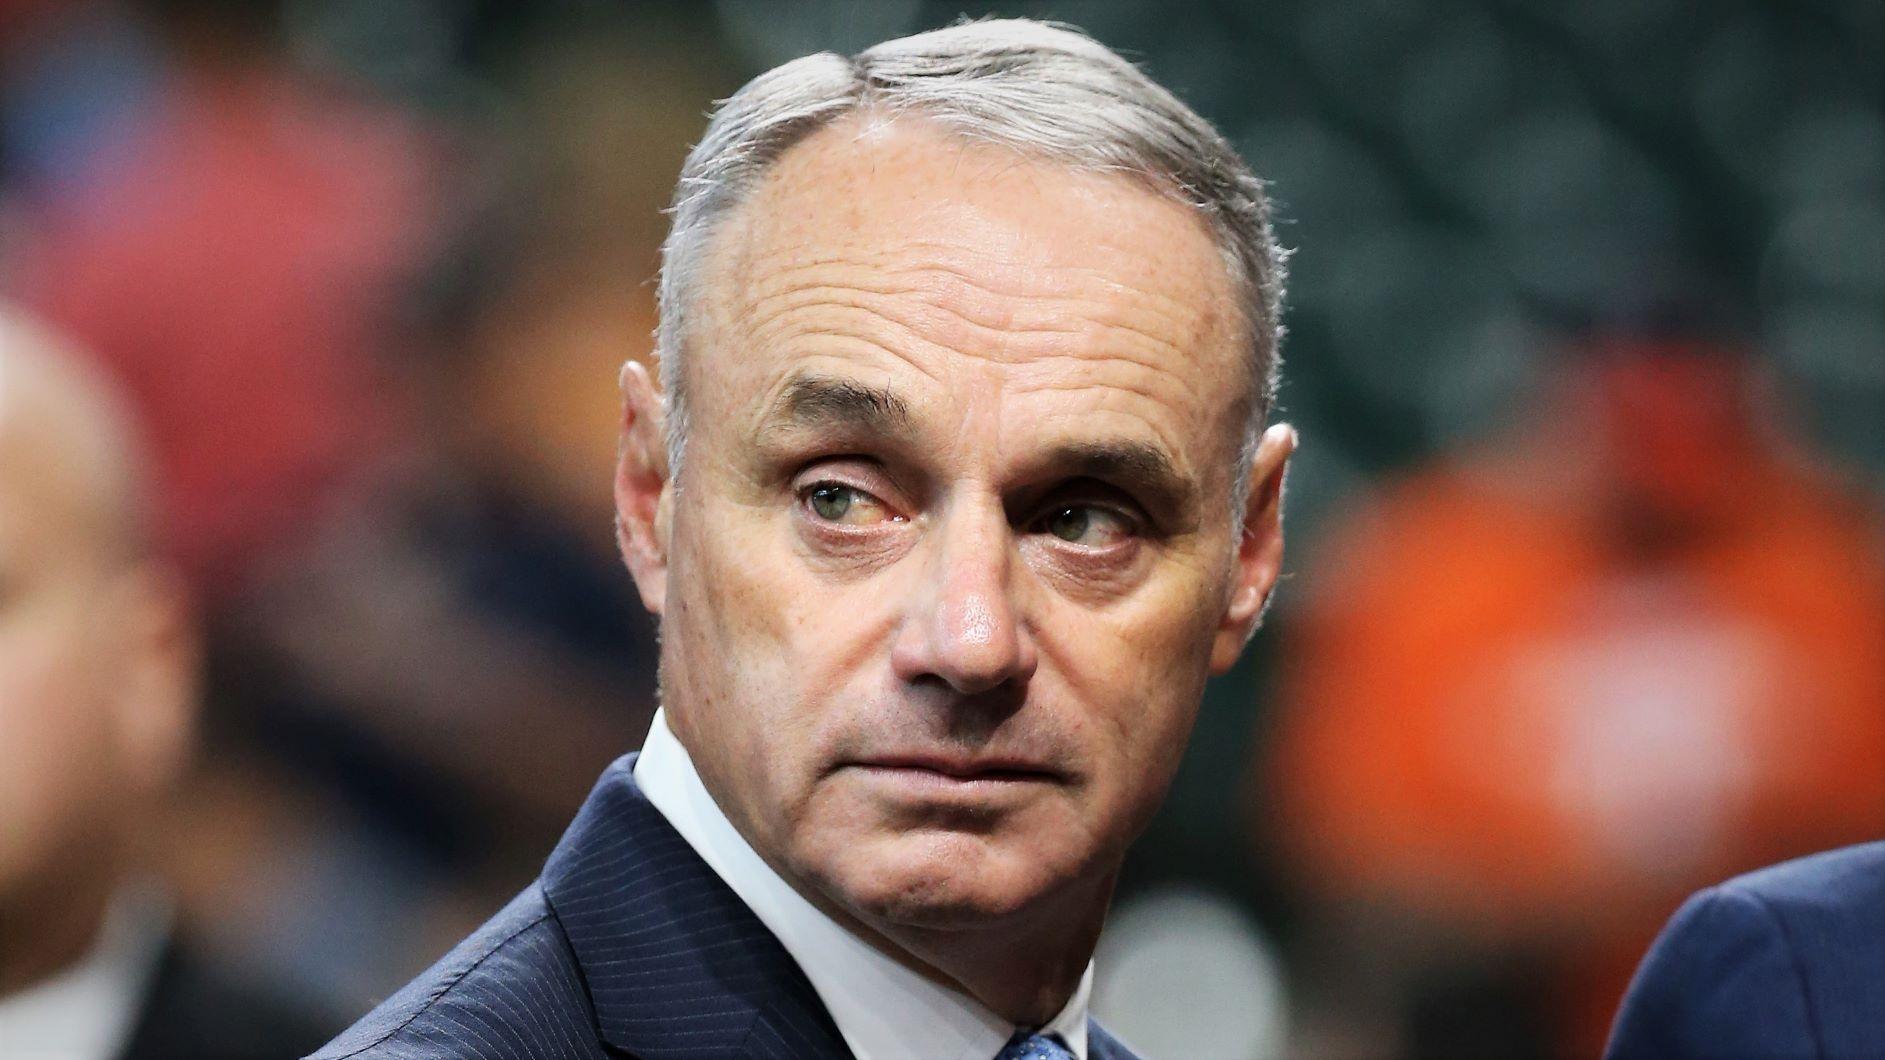 MLB commissioner Rob Manfred looks on before game two of the 2019 World Series between the Houston Astros and the Washington Nationals / © Troy Taormina-USA TODAY Sports